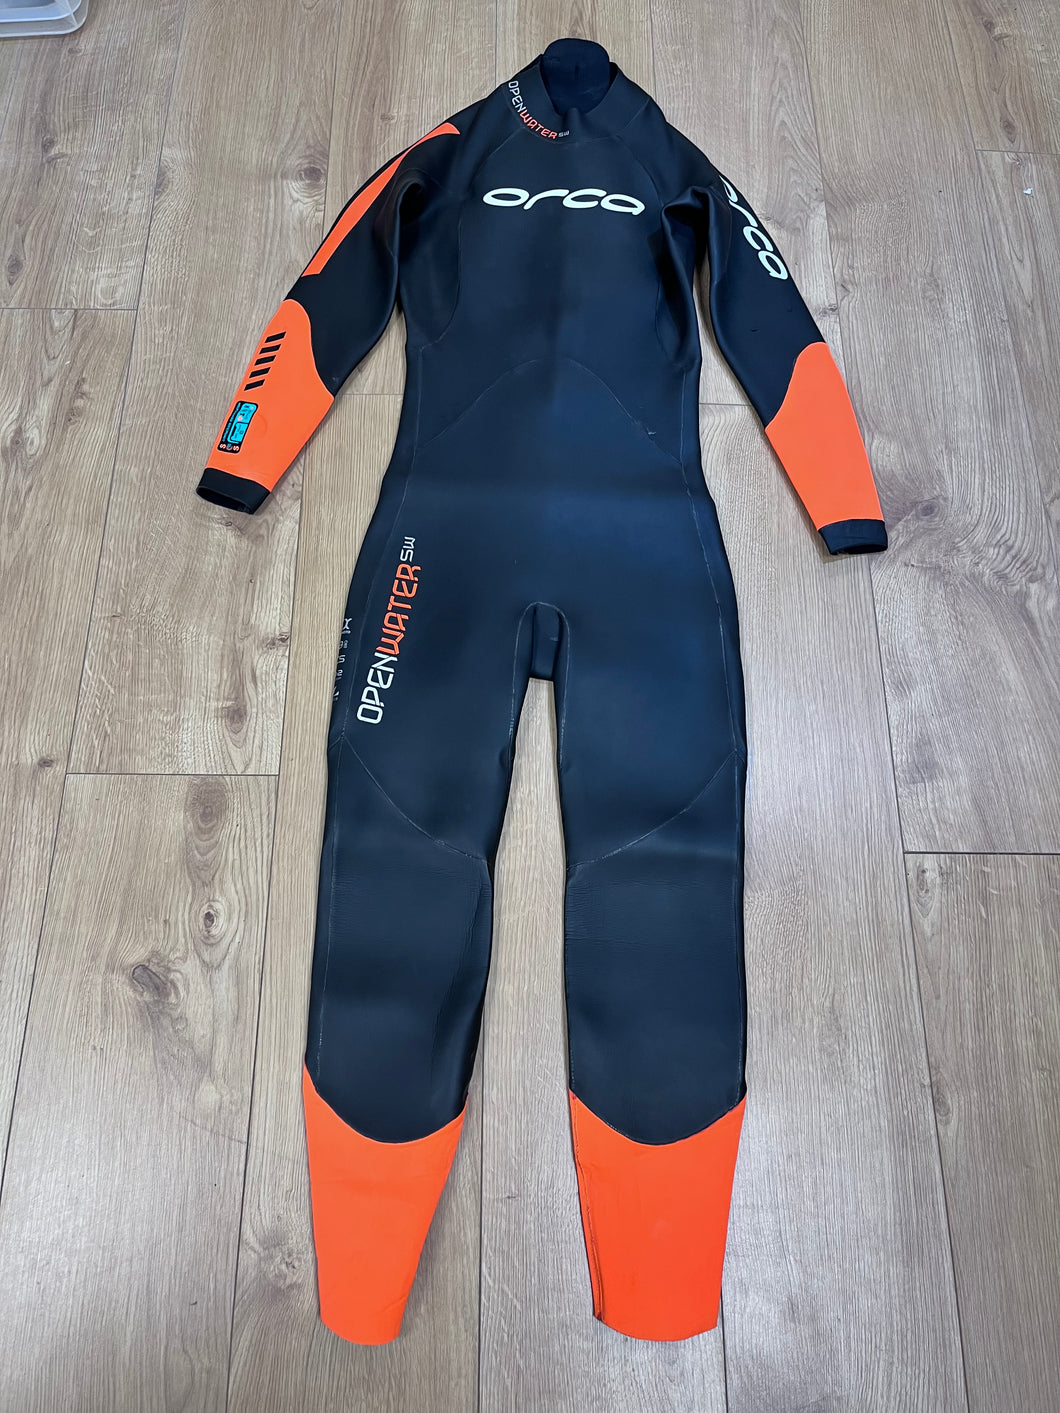 Pre loved Mens Orca Open Water Smart Wetsuit size 7 (1050) - Grade B